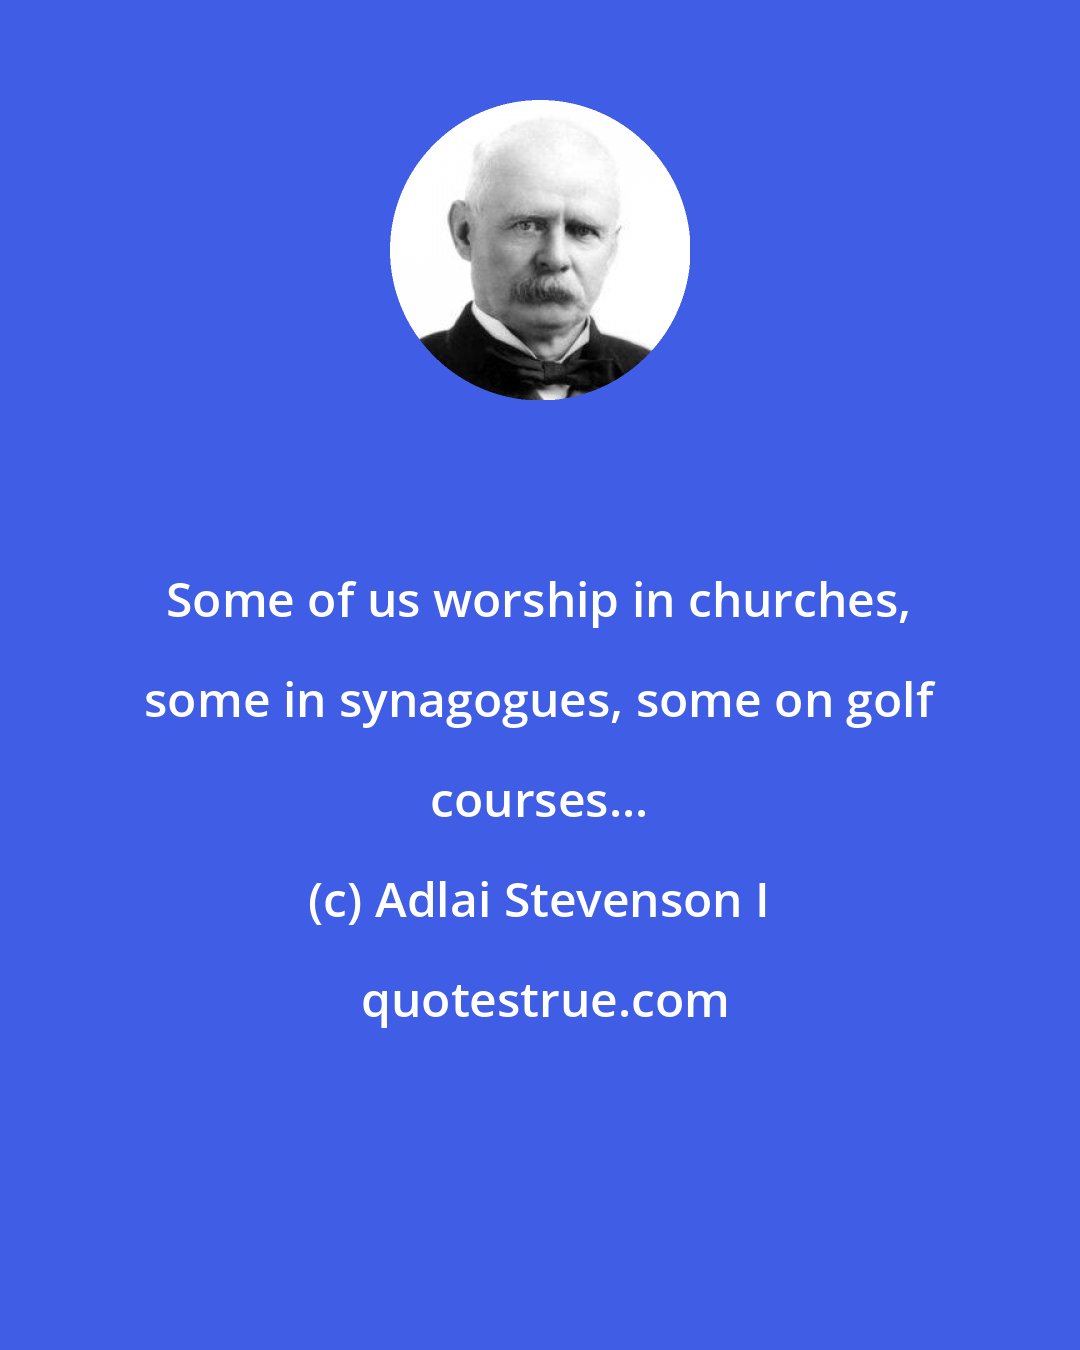 Adlai Stevenson I: Some of us worship in churches, some in synagogues, some on golf courses...